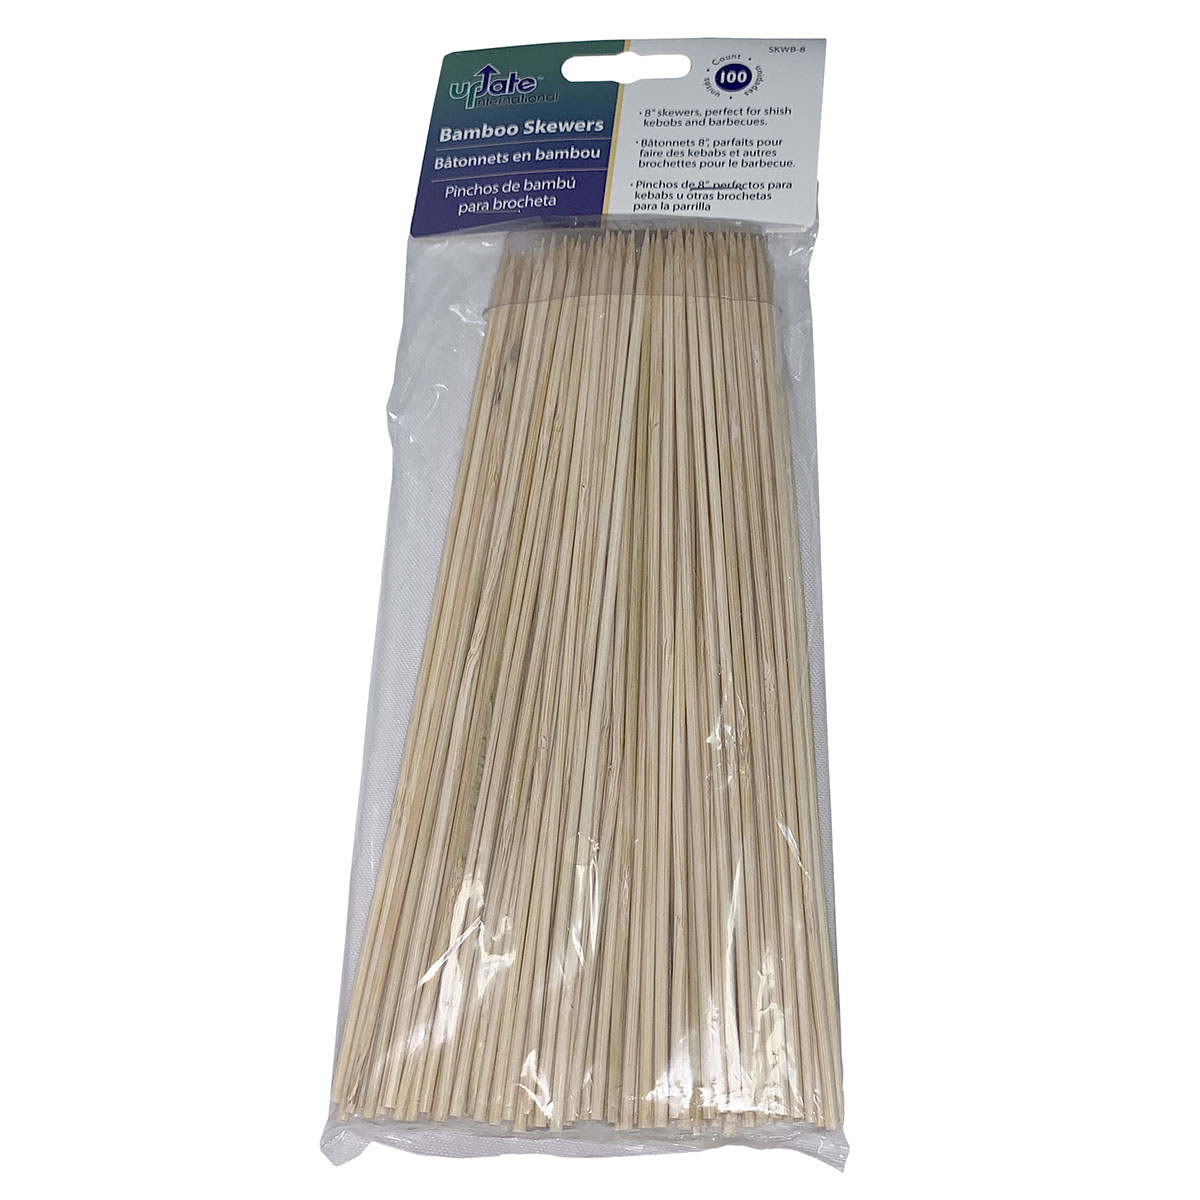 Additional Bags Of Skewers Per 100 Bamboo